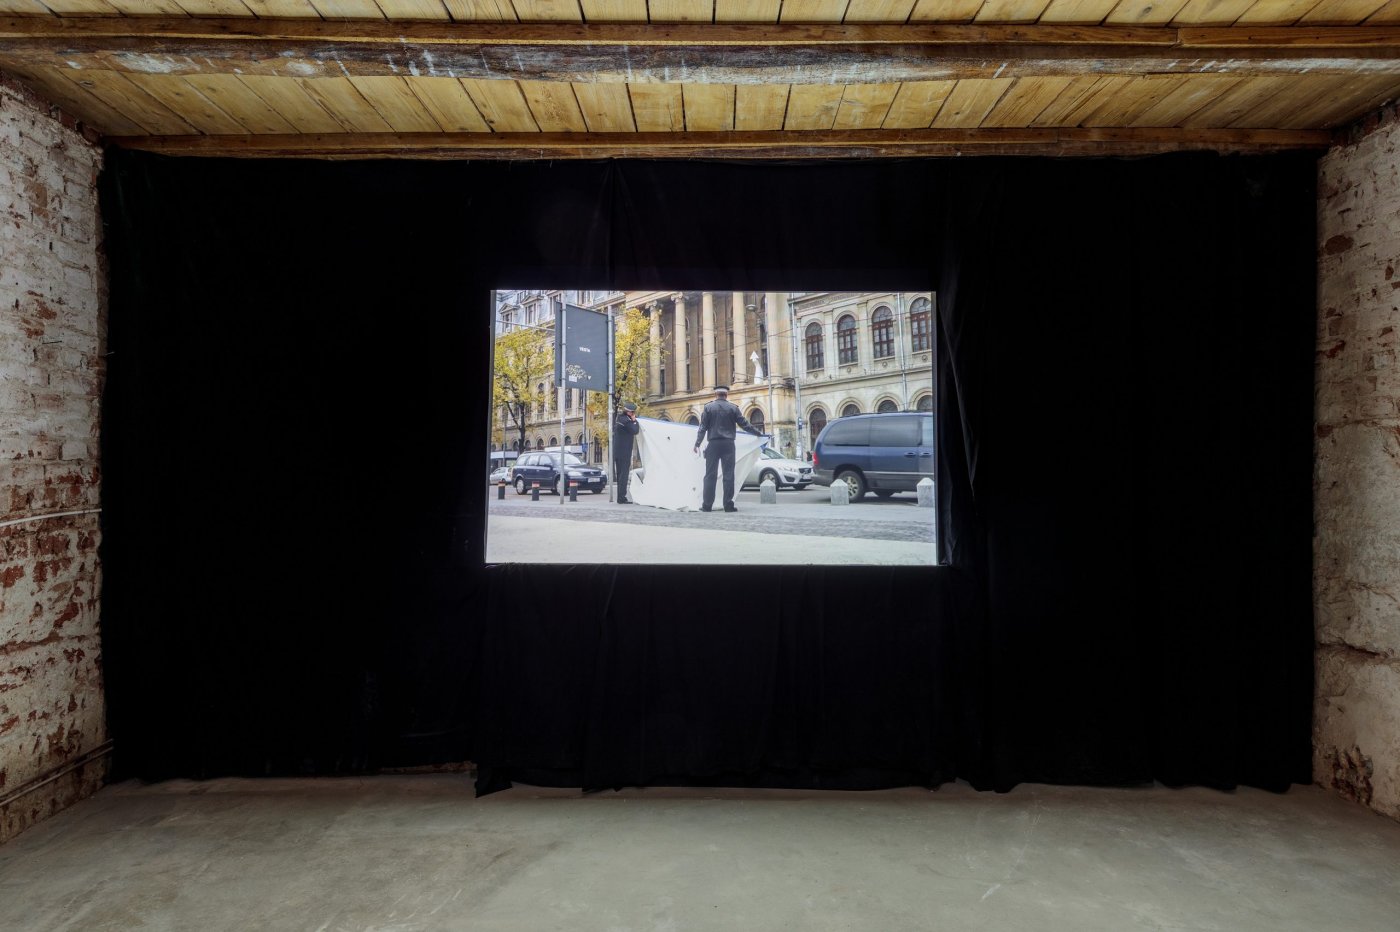 Installation image for The Show That Never Was, at Anca Poterașu Gallery